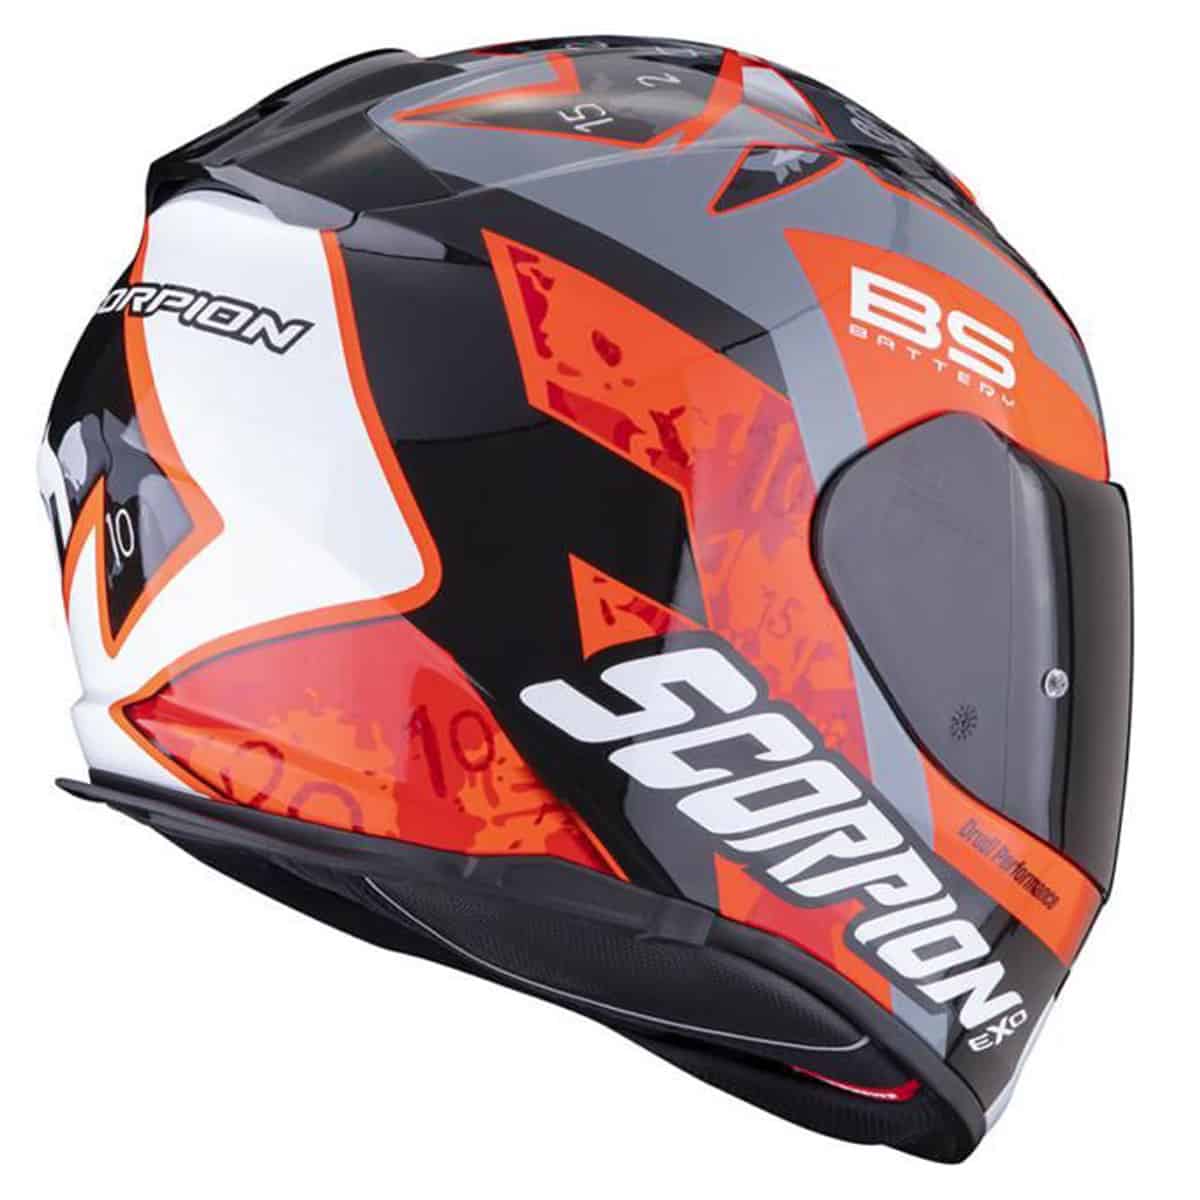 Scorpion Exo 491 Fabio: Entry level full face motorcycle helmet with drop down visor-2